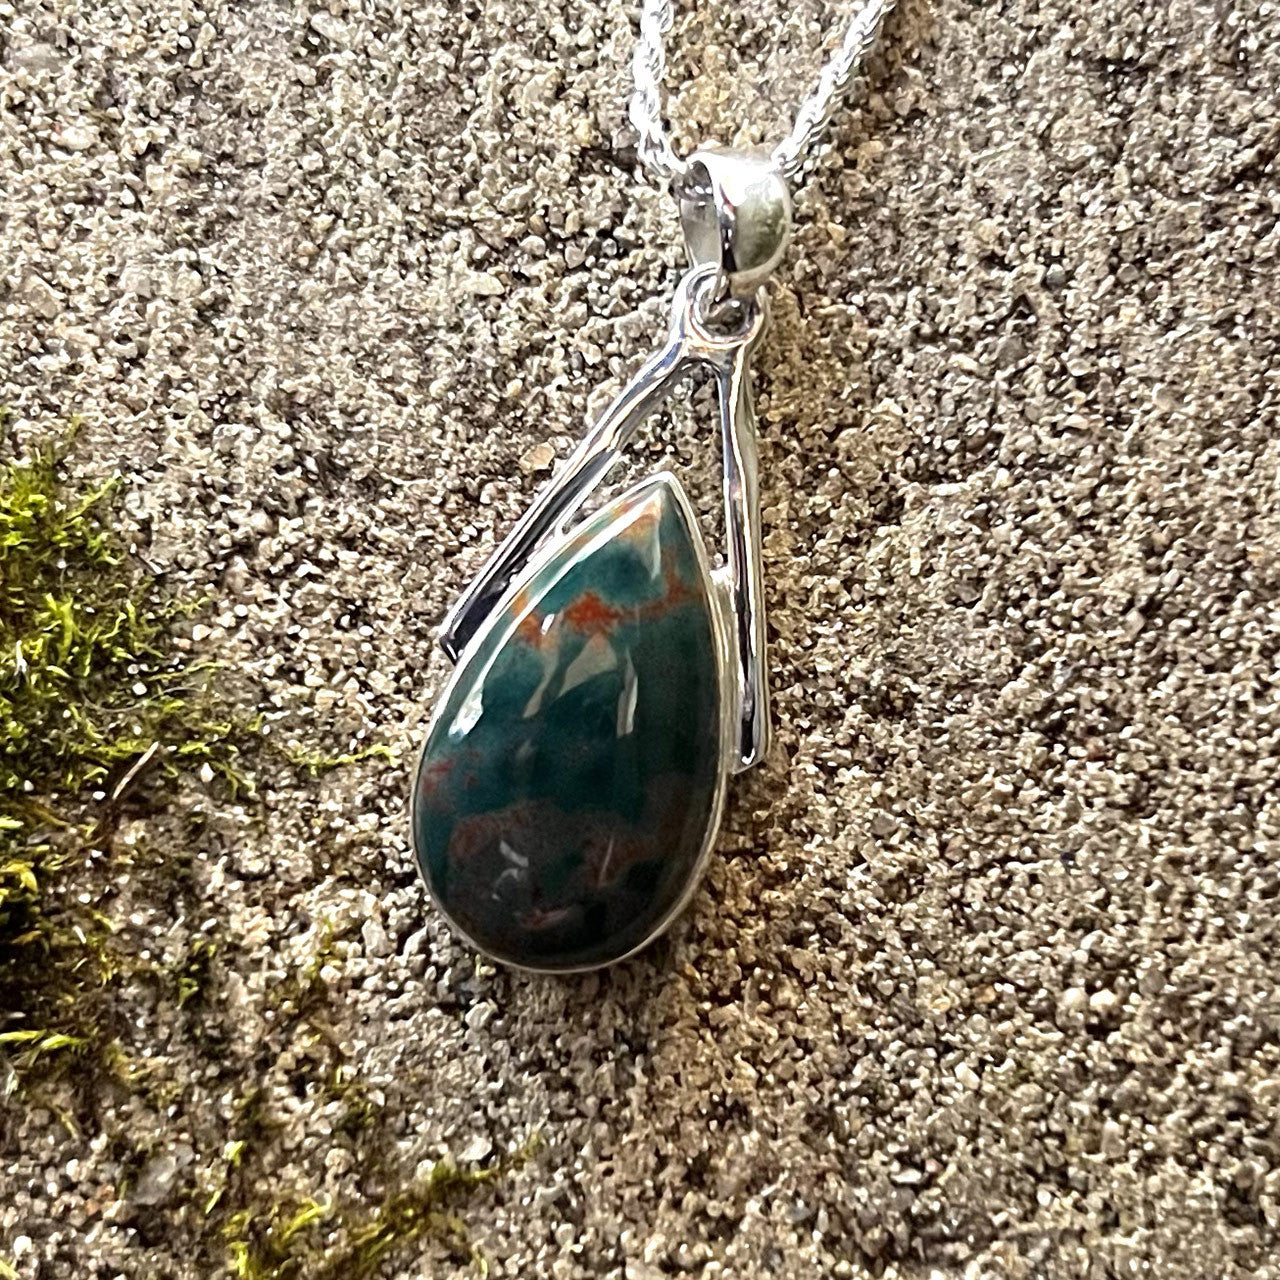 Bloodstone is a powerful healing stone used for thousands of years for its healing properties. It is often used to purify and detoxify the body. Great at grounding negative energy and cleansing the body, Bloodstone brings love into any situation and helps ground the negative energies surrounding that issue.